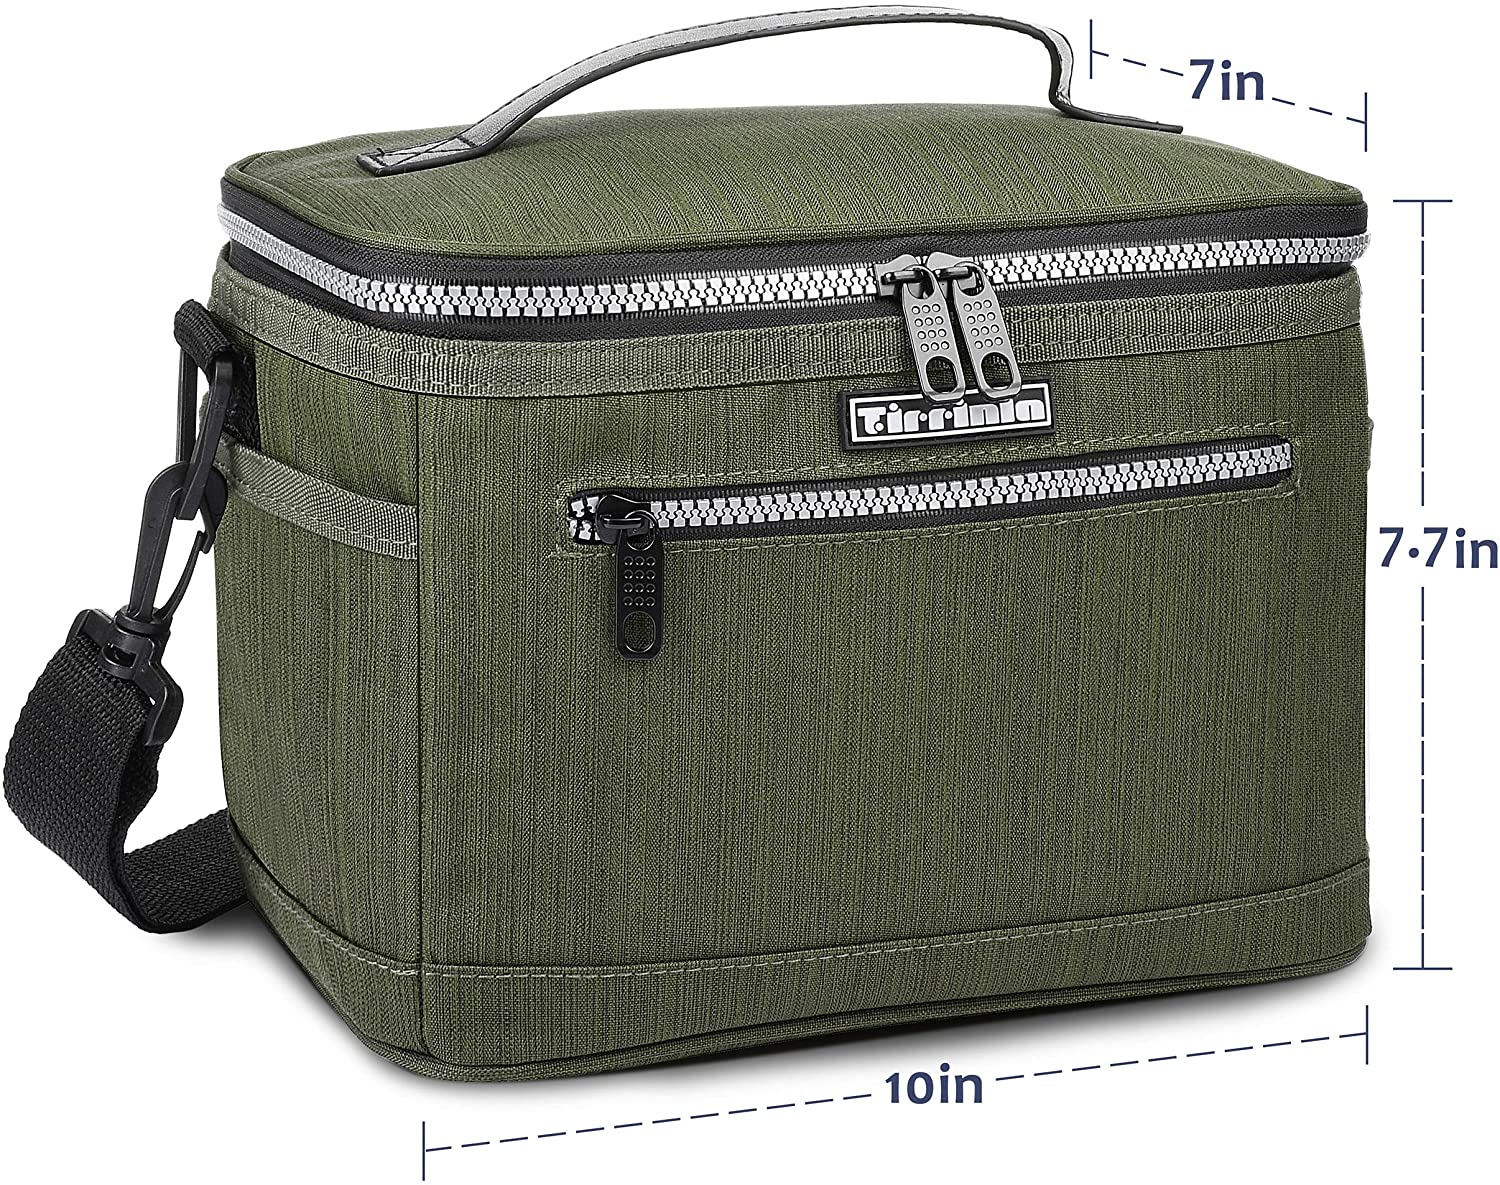 Tirrinia Insulated Lunch Bag for Women Men, Leakproof Thermal Reusable Lunch Box for Adult & Kids, Lunch Cooler Tote for Office Work Back to School, Olive - image 5 of 8